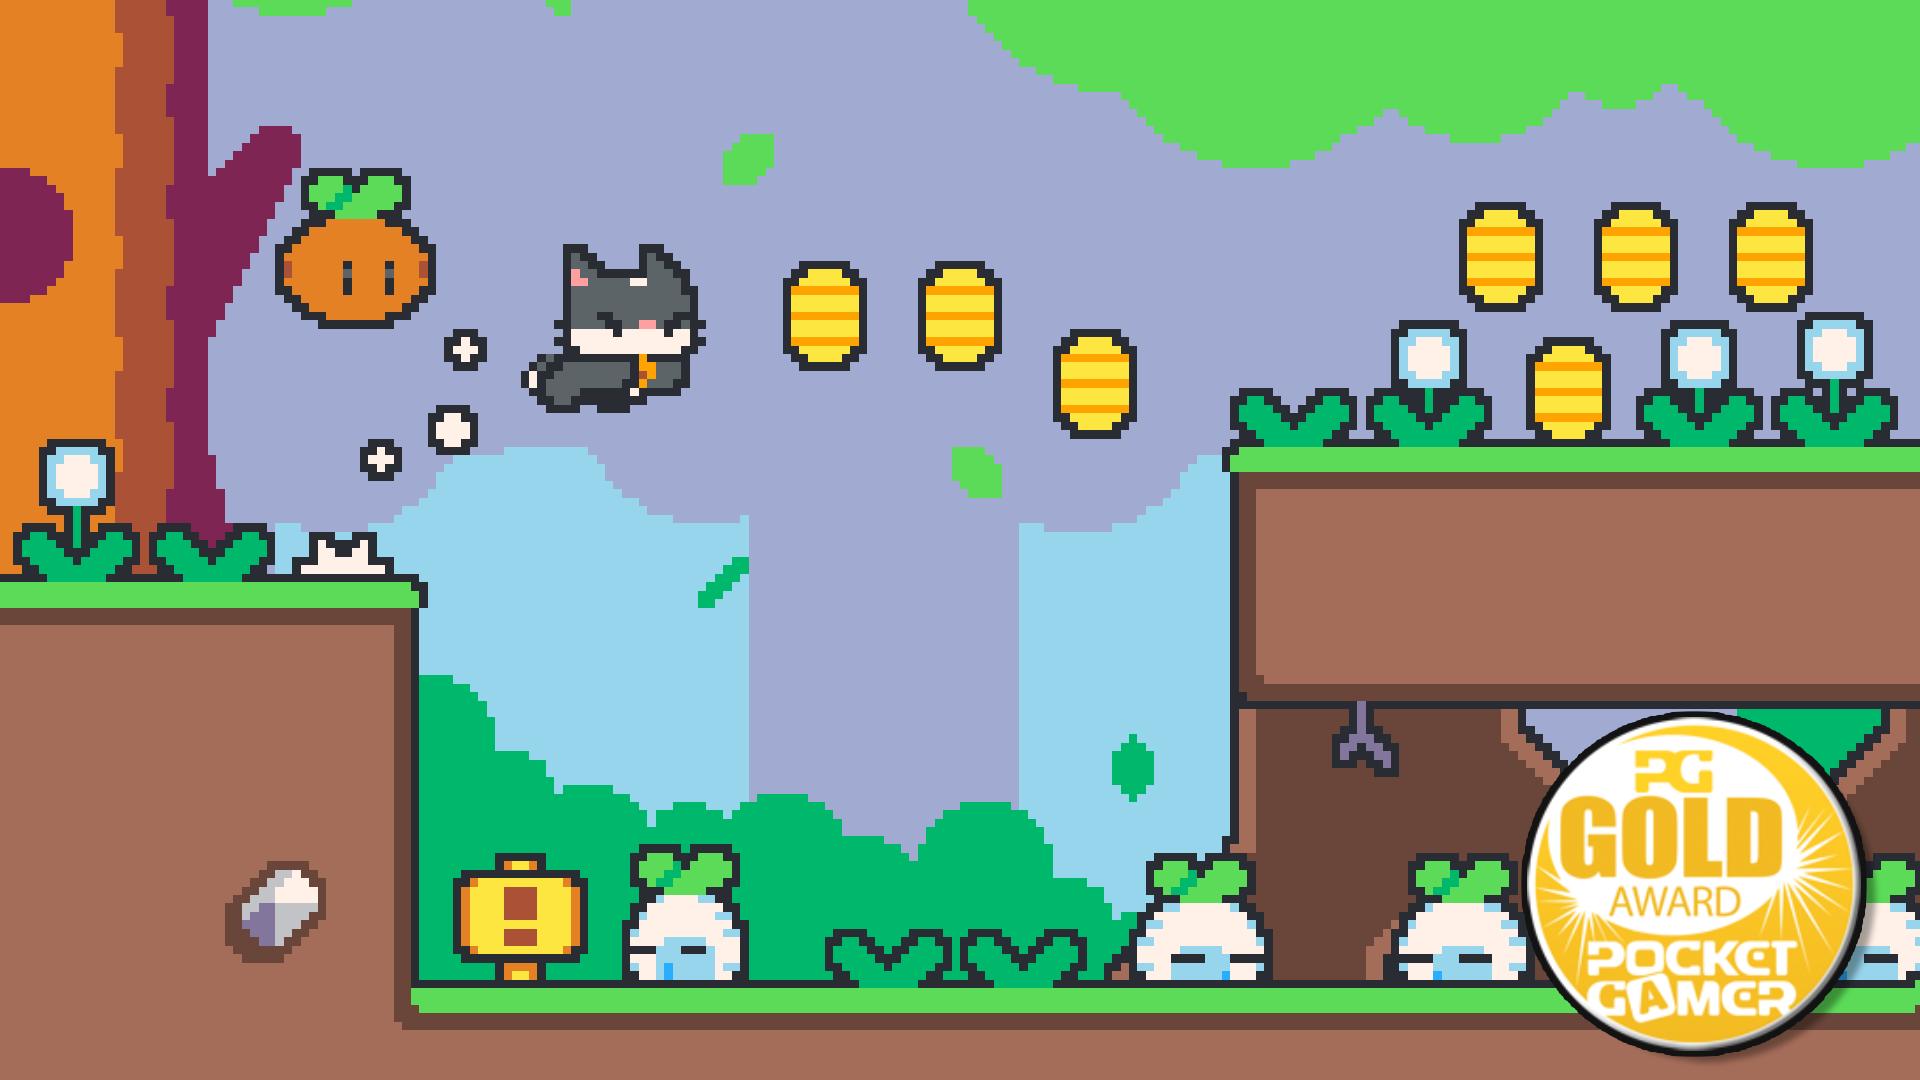 Super Cat Gun: Adventure World for Android - Free App Download